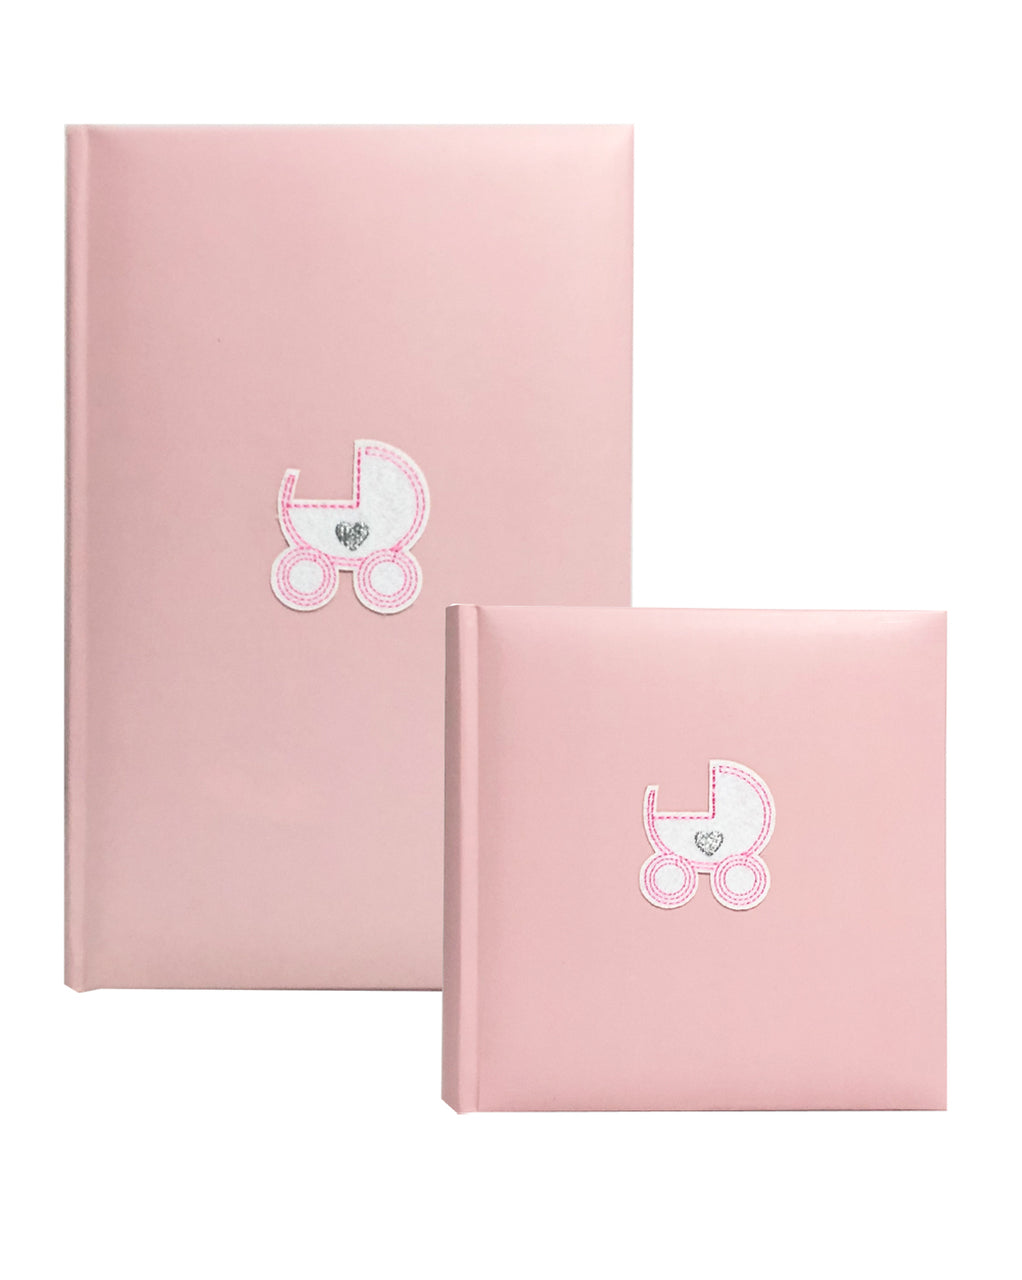 PROFILE PRODUCTS BABY PINK PRAM 300 PHOTO 4X6 ALBUM - Gifts R Us